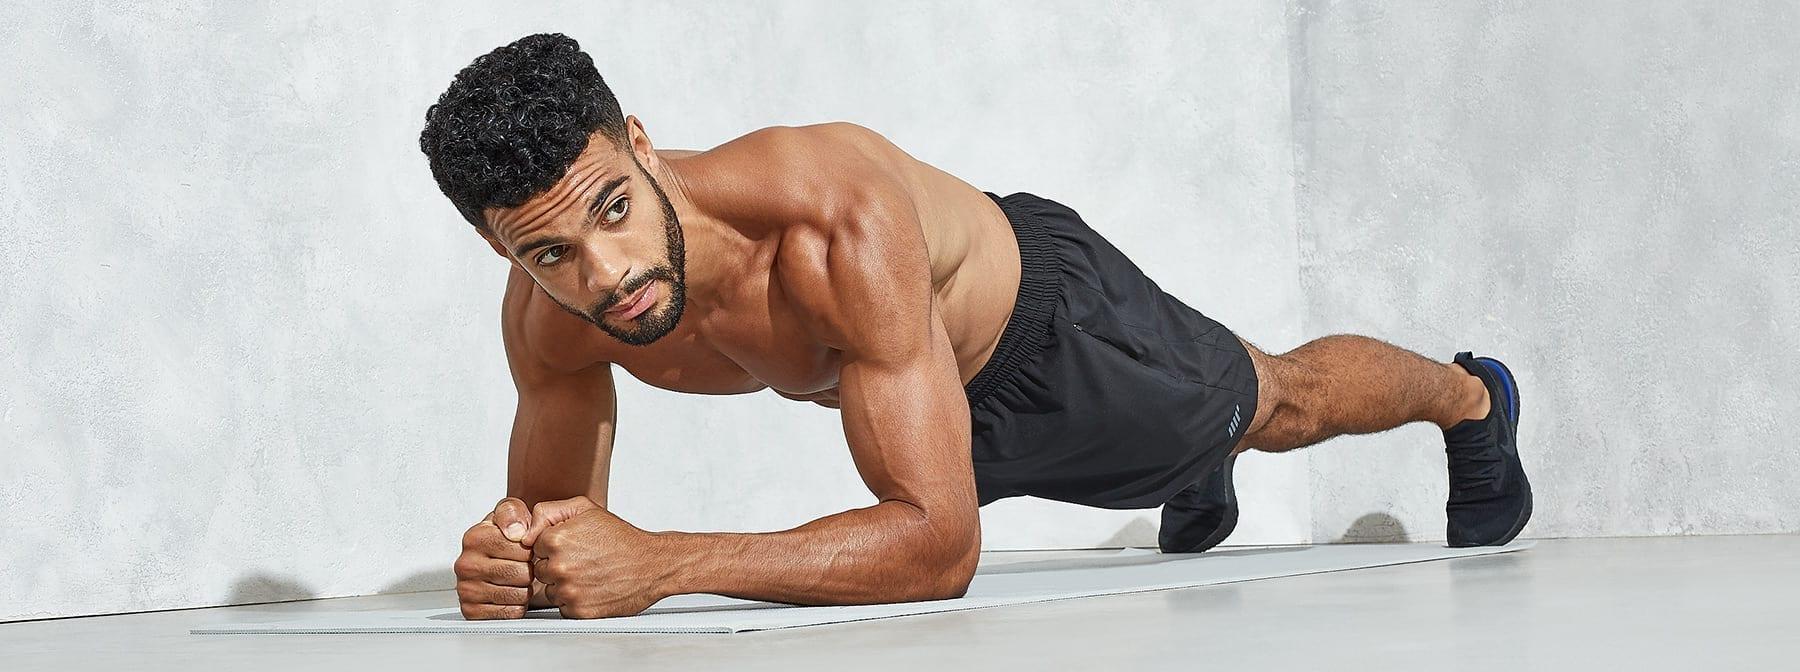 Can You Take On This 30-Day Plank Challenge?